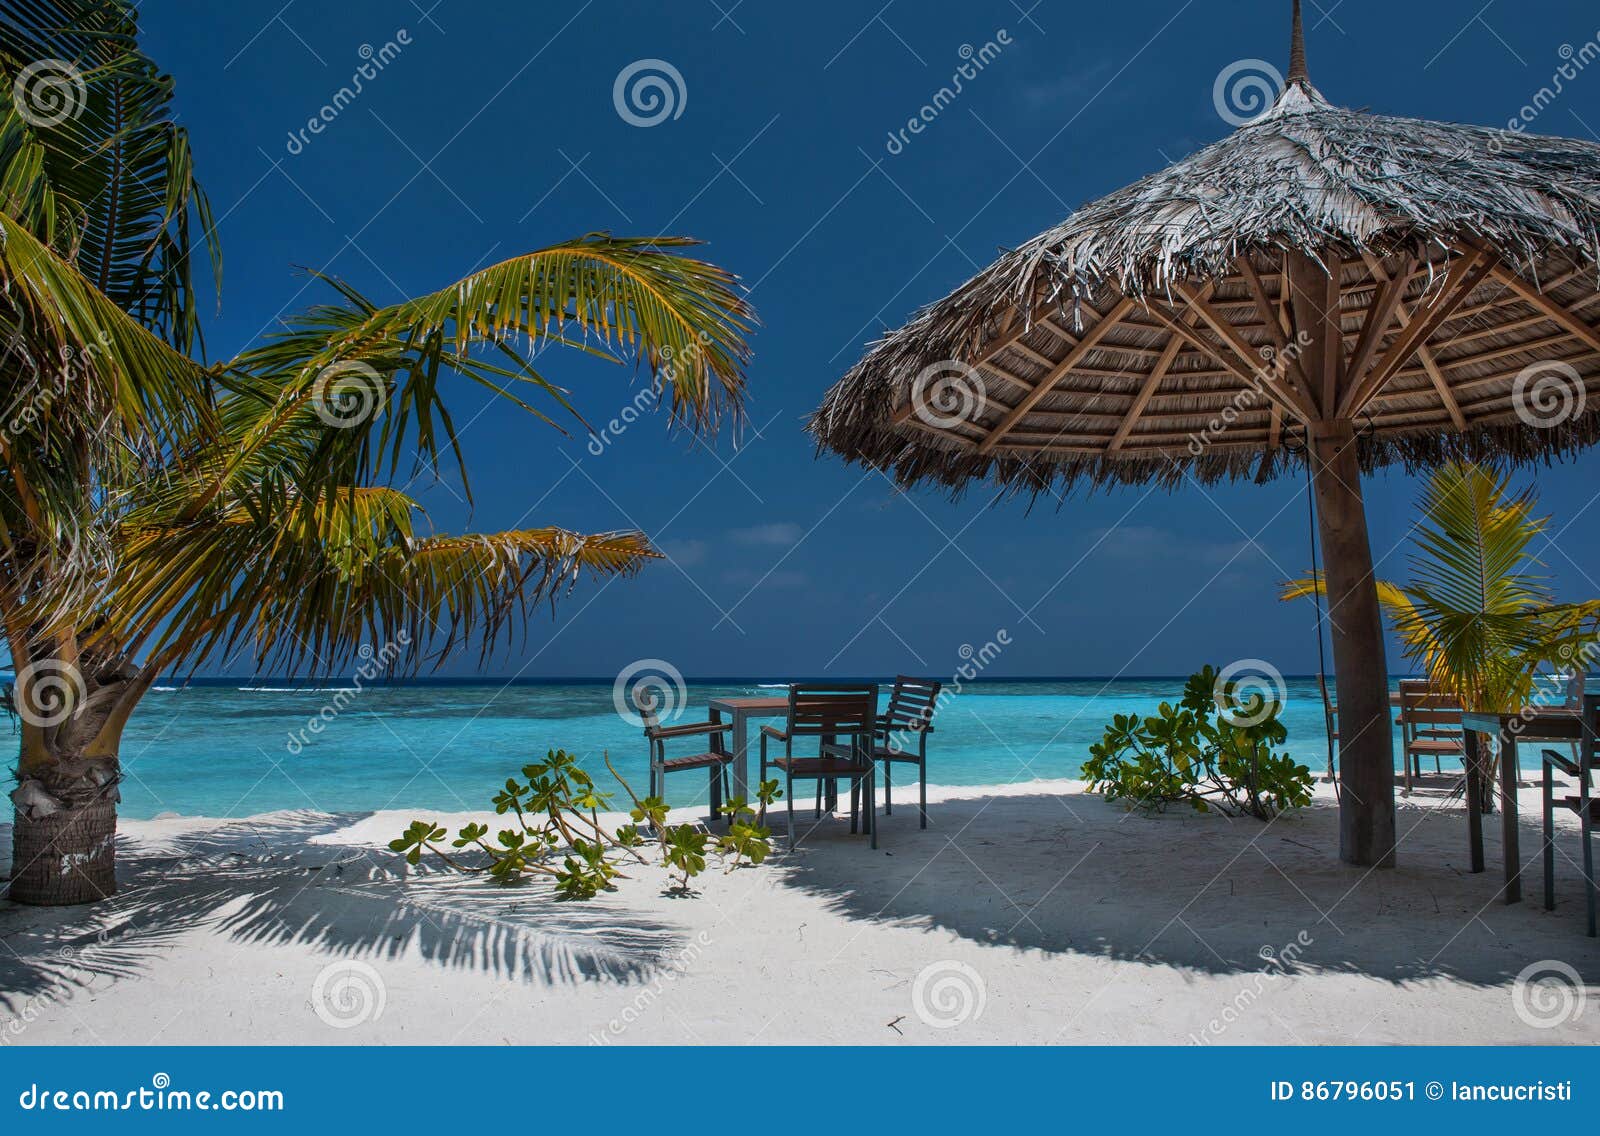 tropical island with palm trees and amazing vibrant beach in maldives. white parasol in sea tropical maldives romantic atoll